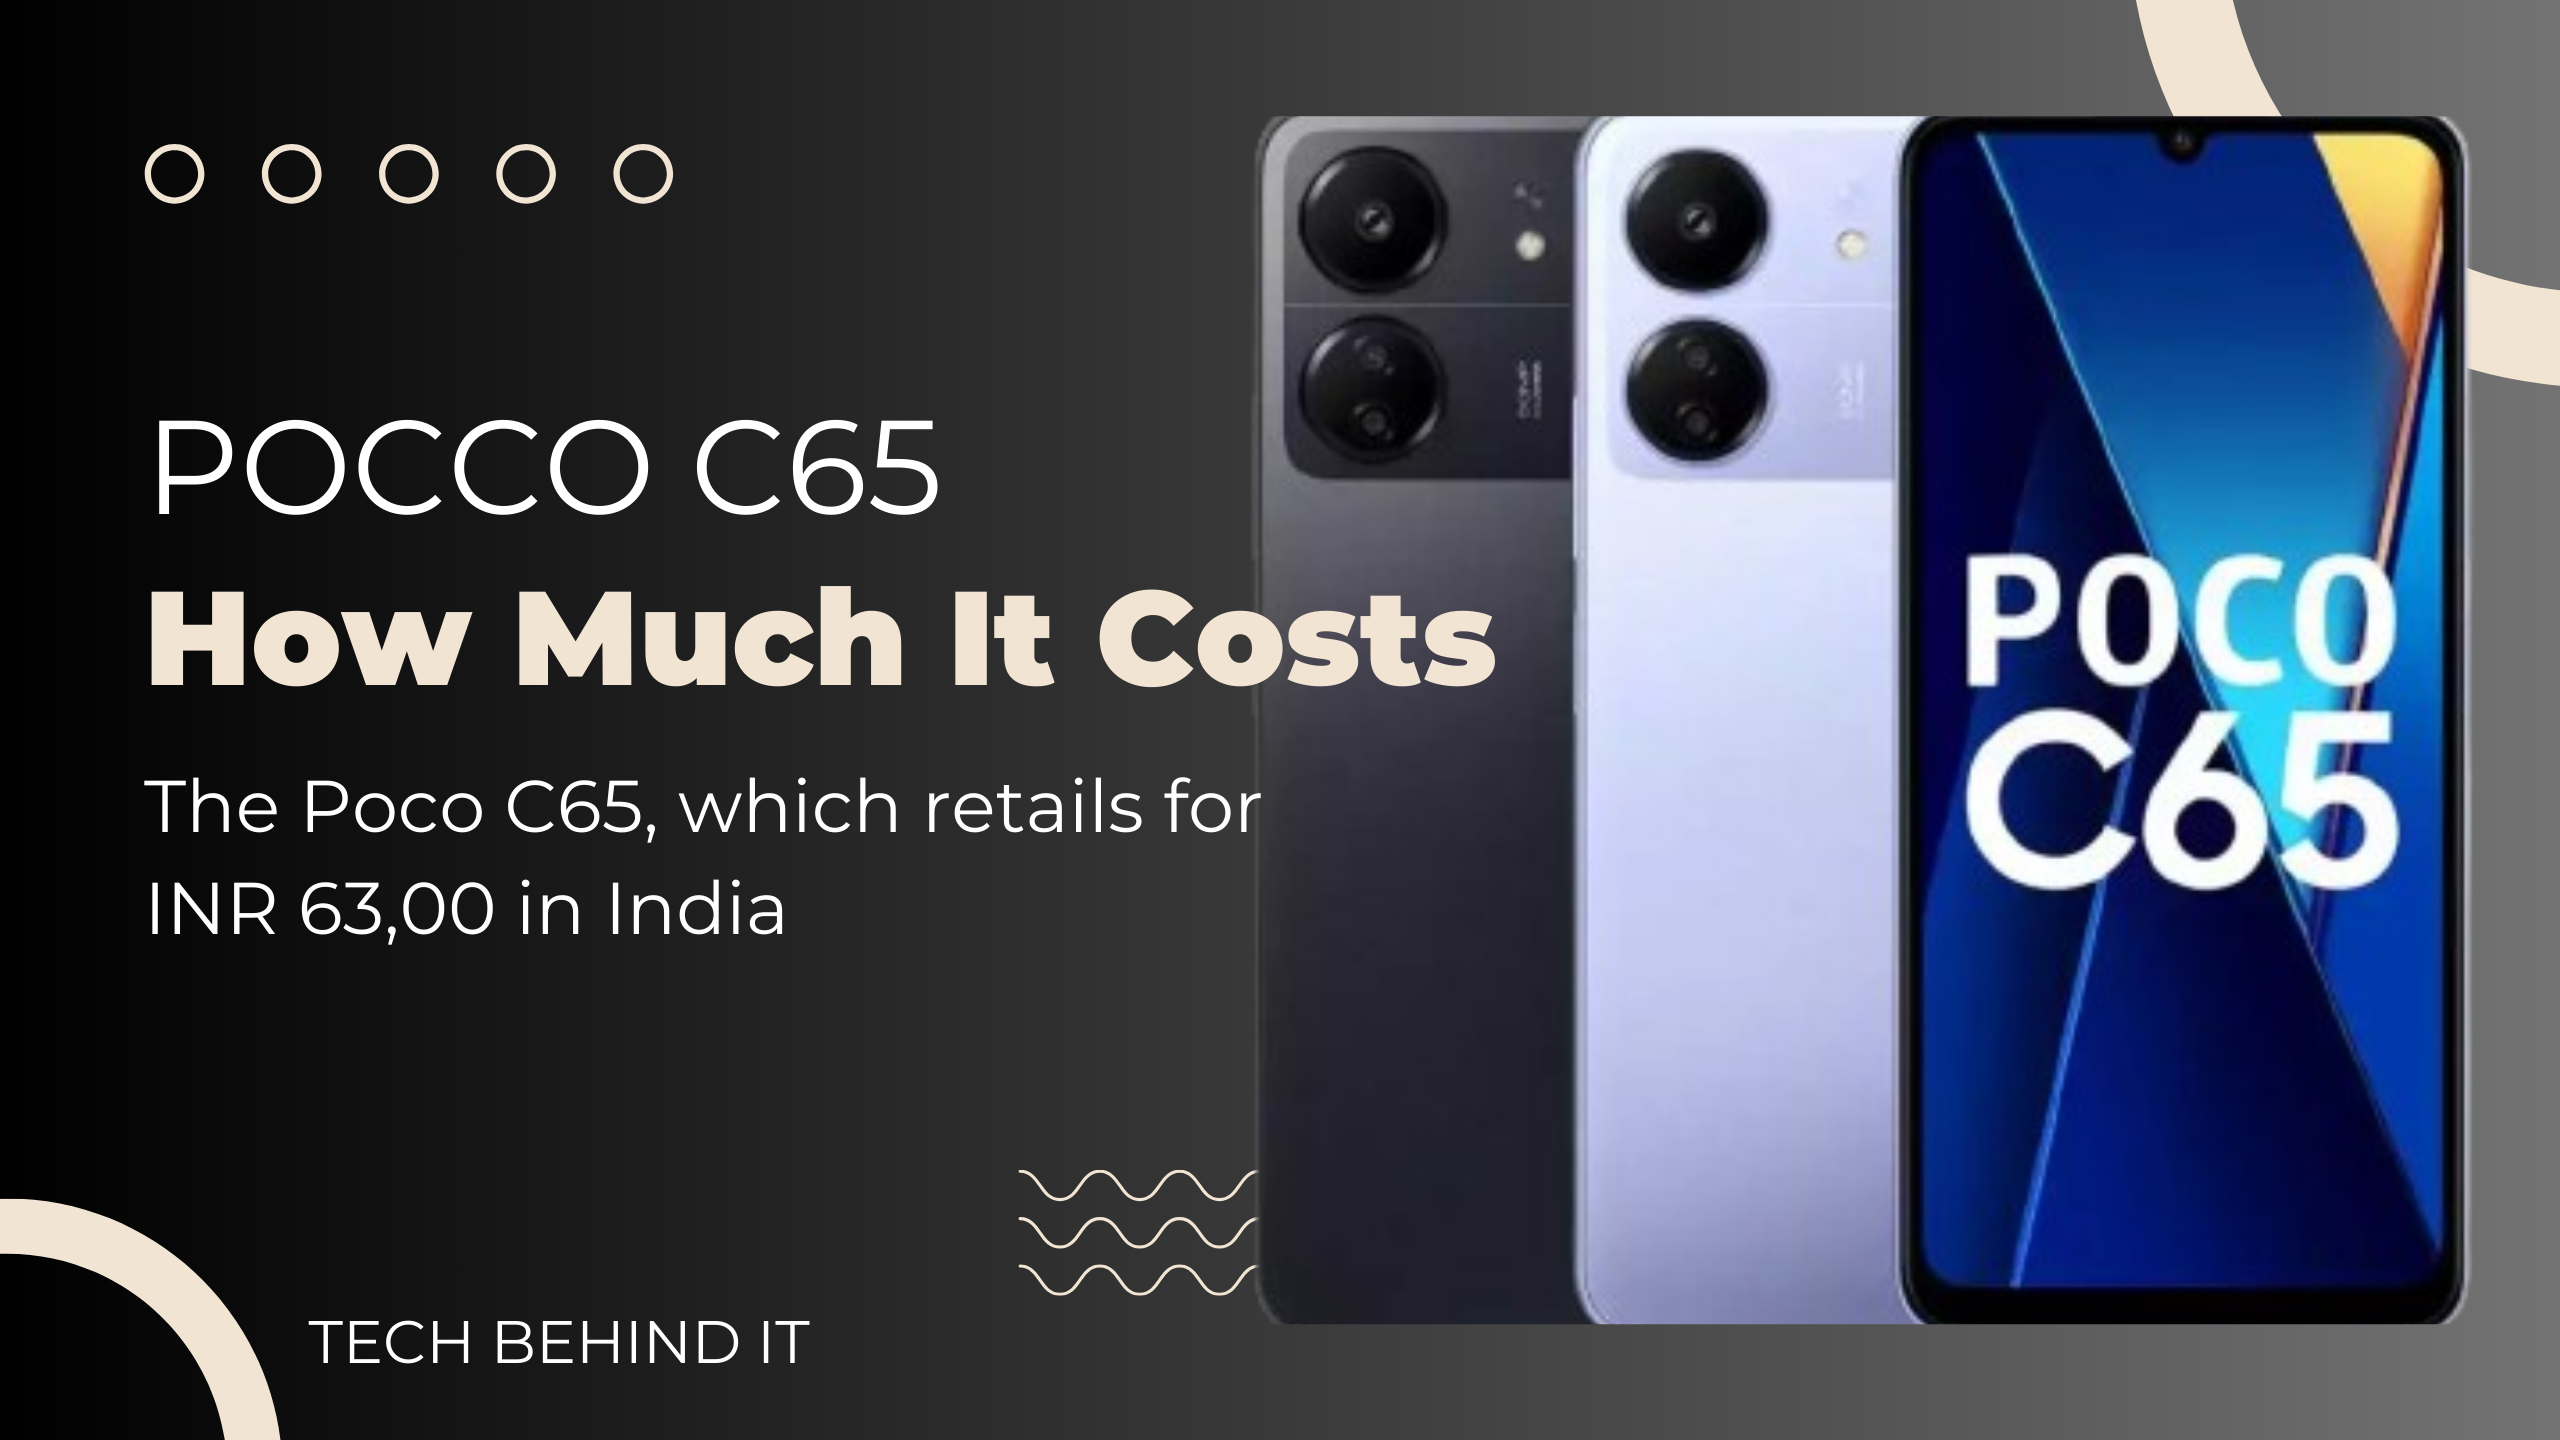 Poco C65 Is Now On Sale In India; Find Out How Much It Costs!